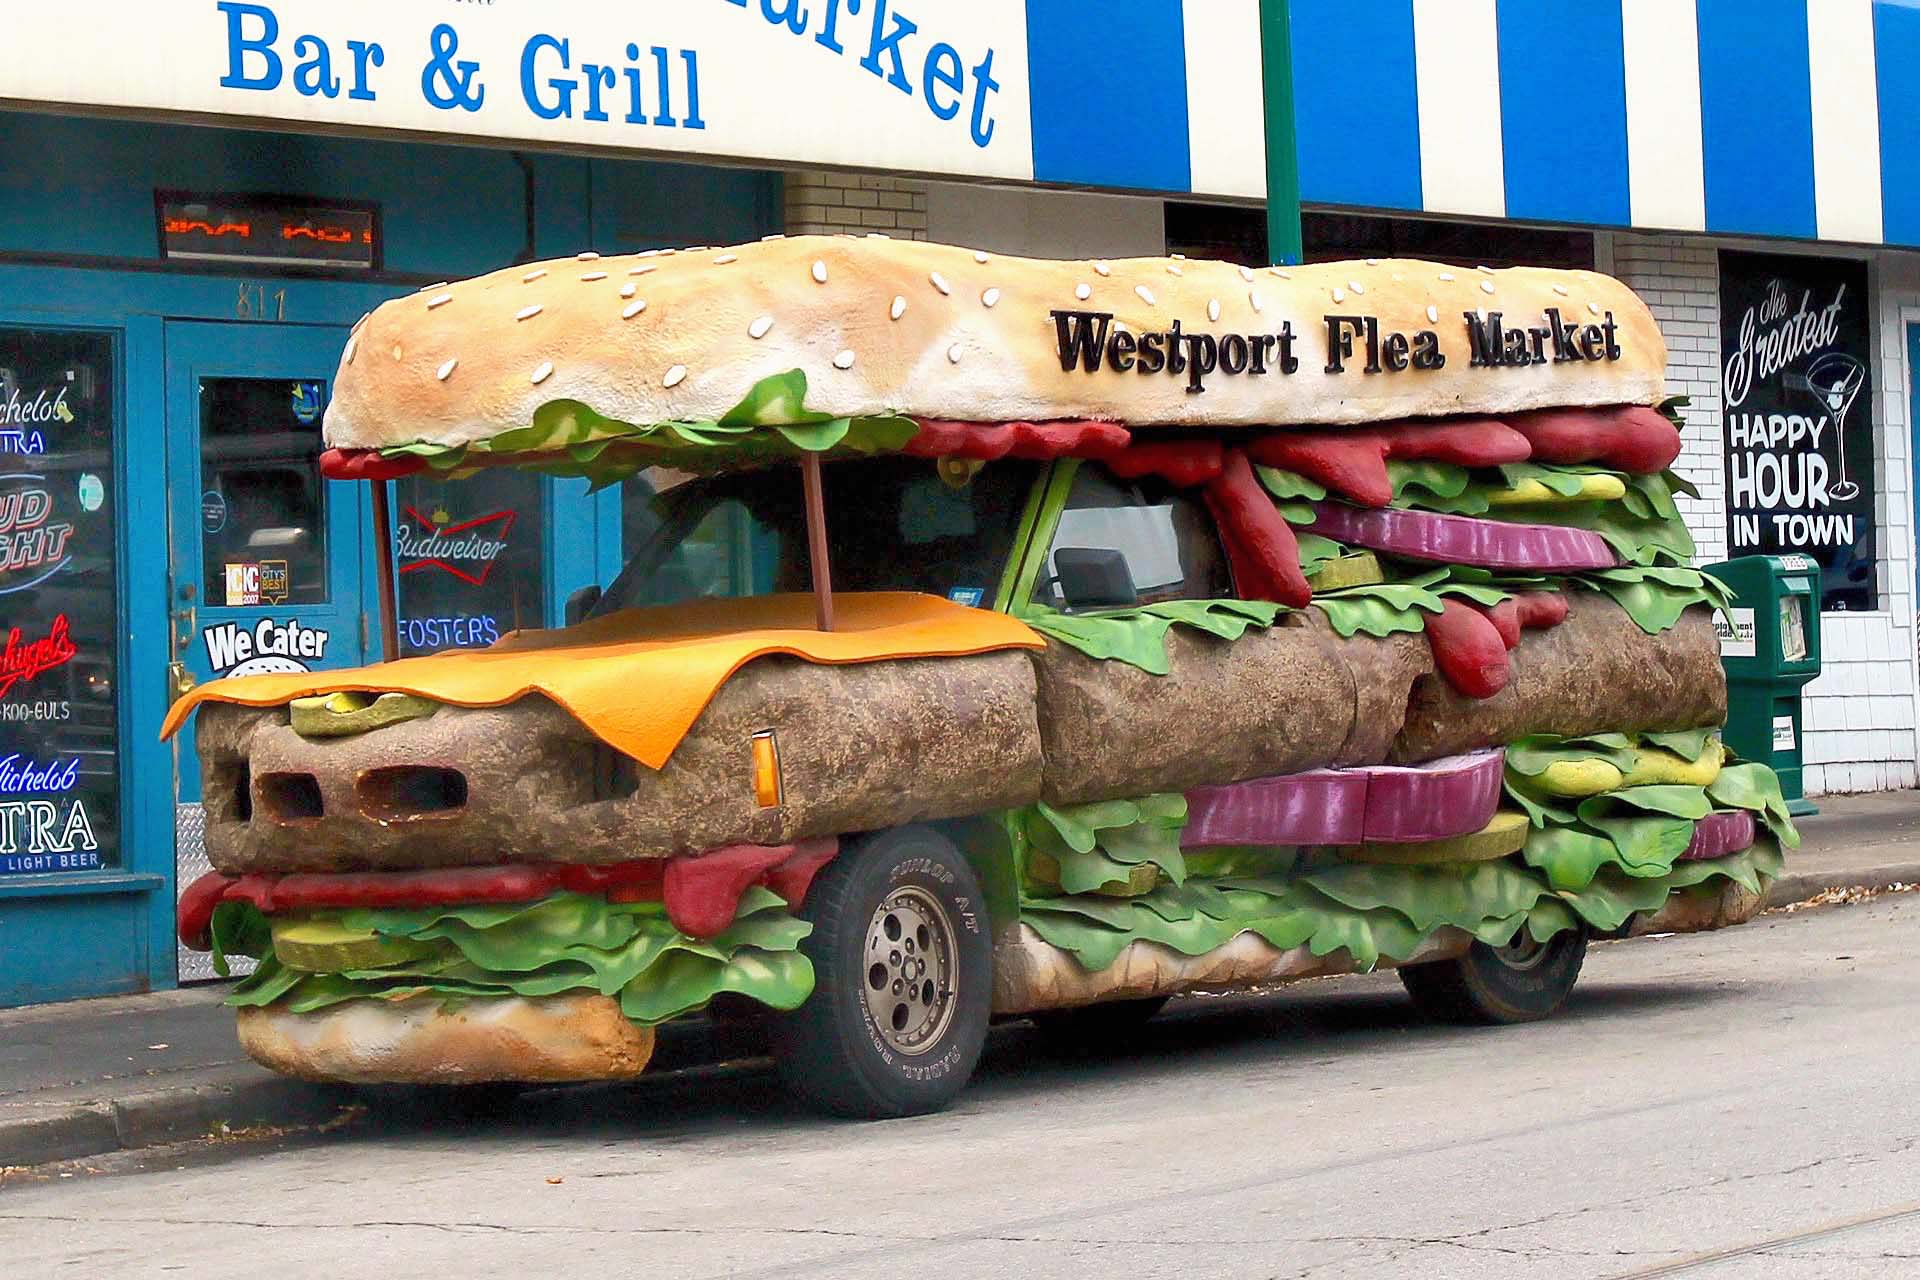 While not a food truck per se, this promotional bus for Westport Flea Market Bar and Grill is delicious. Created by master promotional vehicle artist Matt Targon, who had always dreamed of creating a burger car, the beefy, cheesy vehicle based on a Chevrolet S10 pickup roams the streets of Kansas City getting the name of this tasty burger joints out and about.